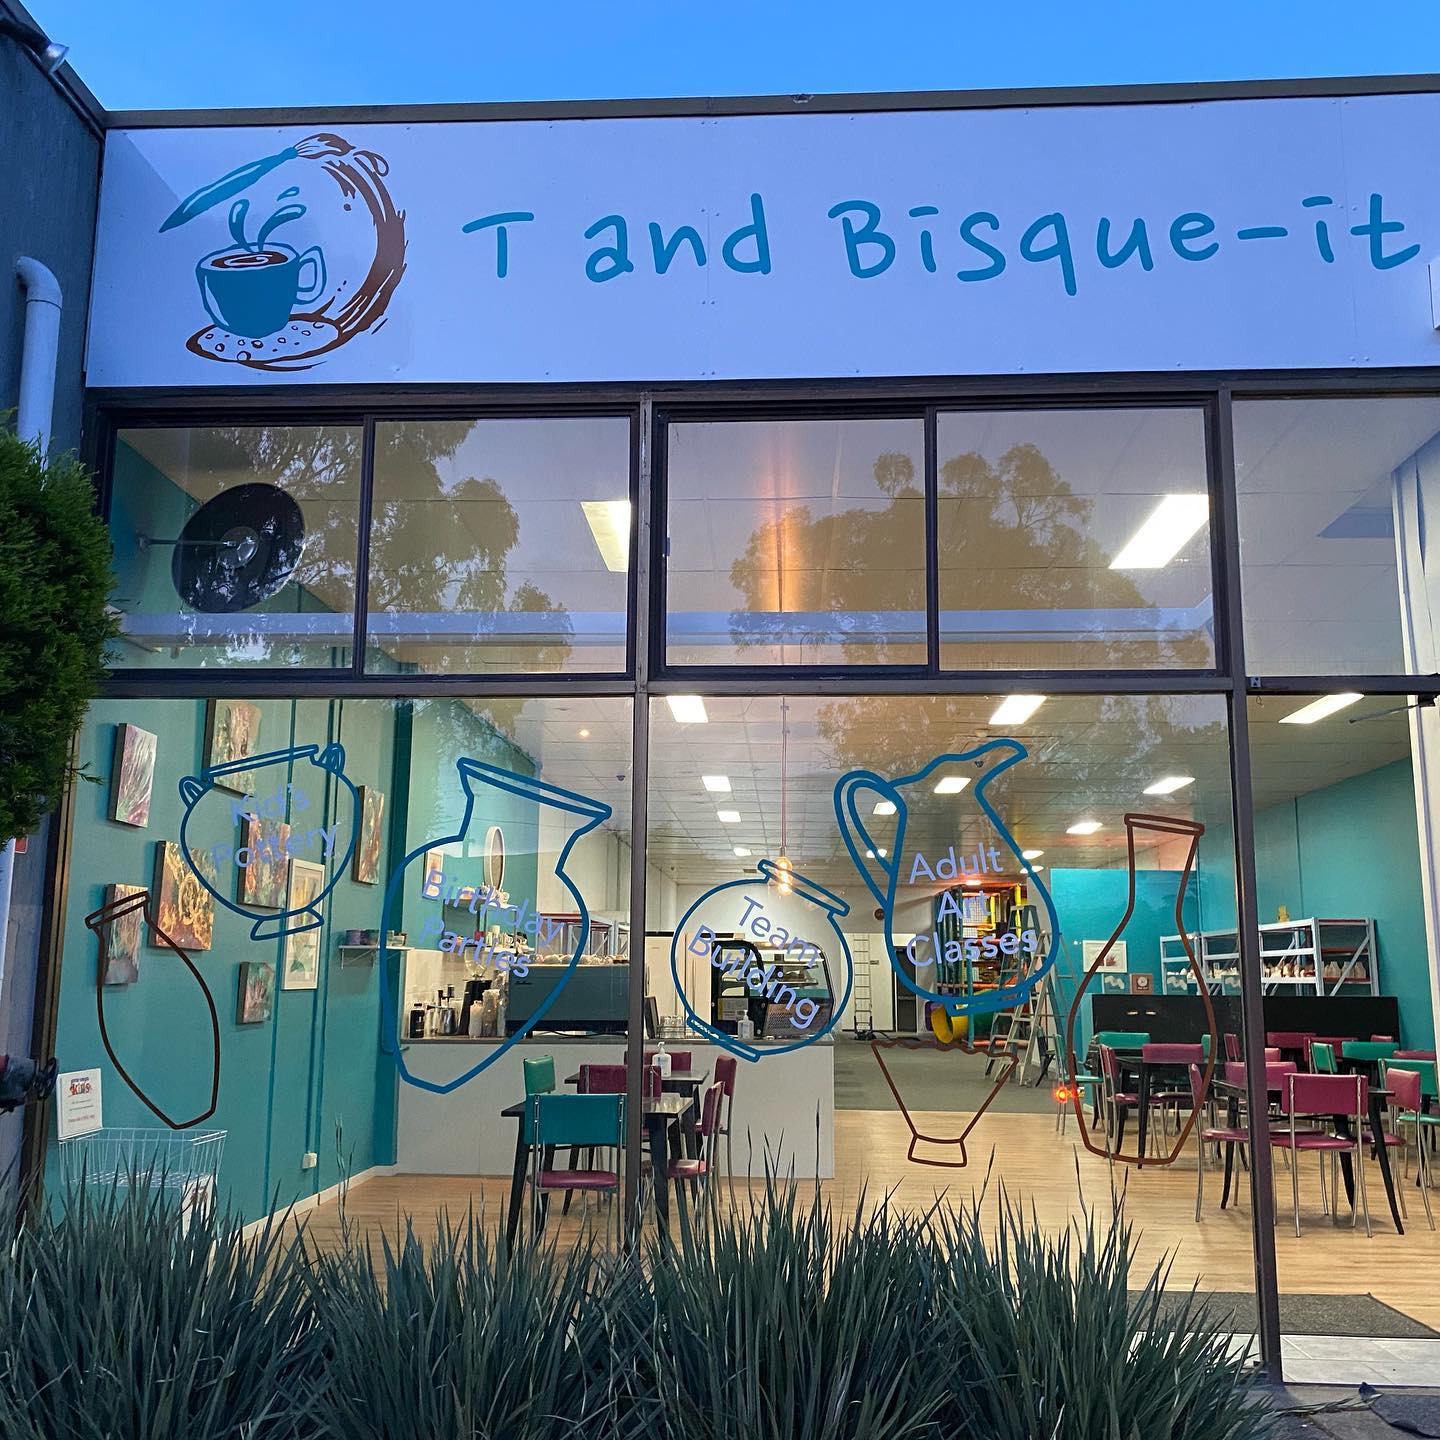 T and Bisque-it – Gecko Signs